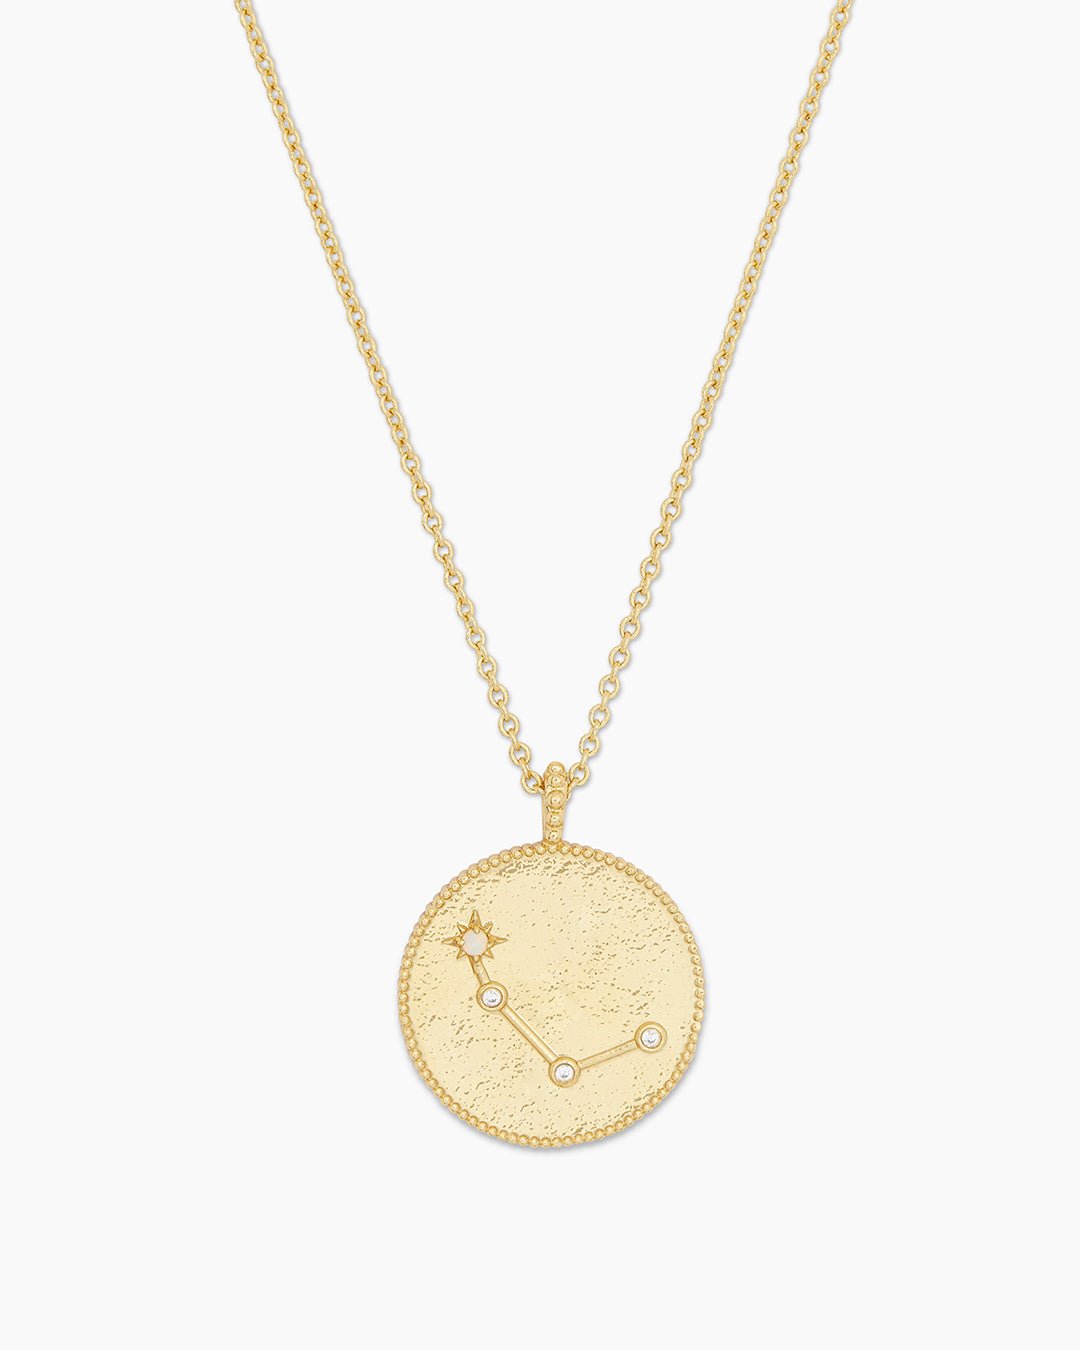  Astrology Coin Necklace (Aries) || option::Gold Plated, Aries